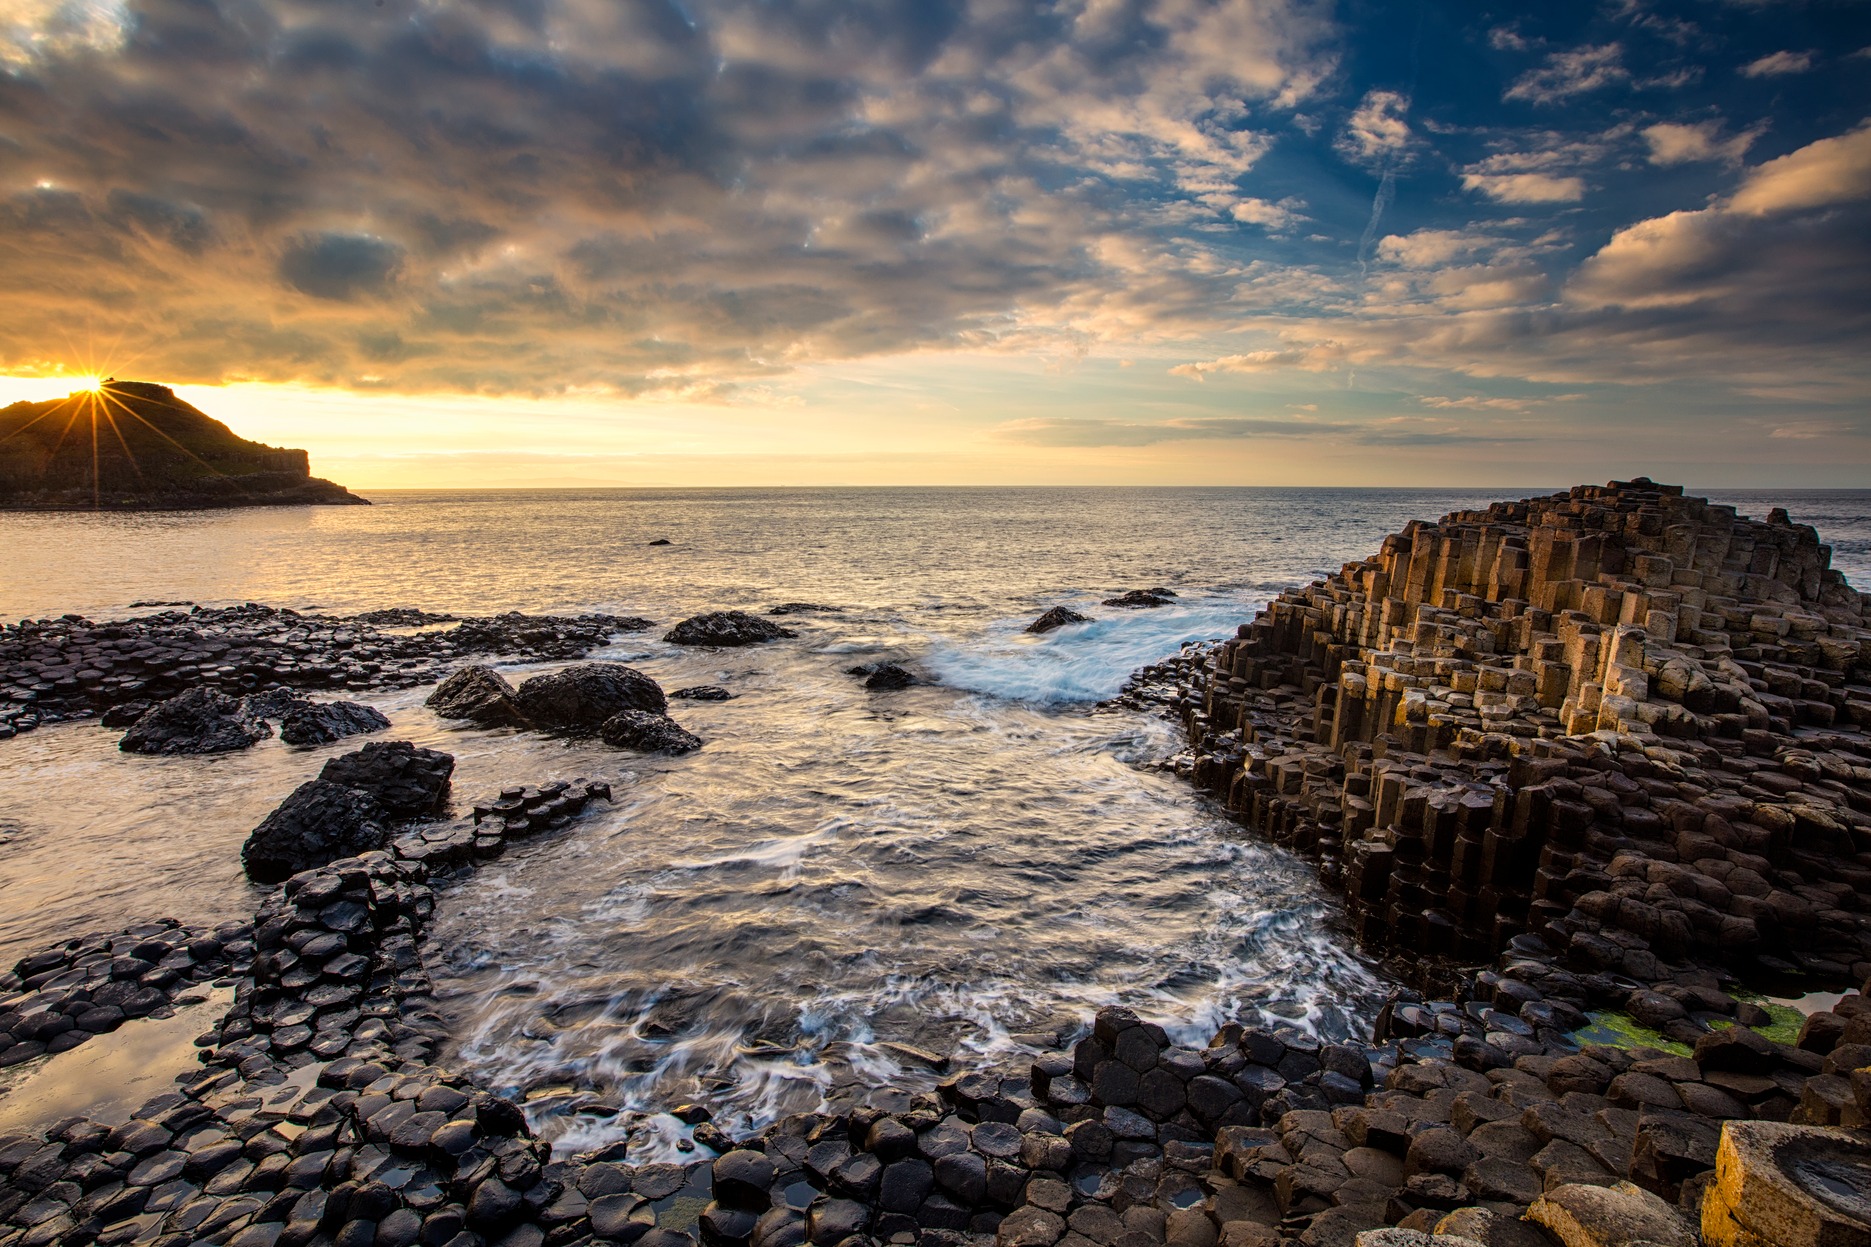 Giant's Causeway - hexagonal stone structures rise out of the sea